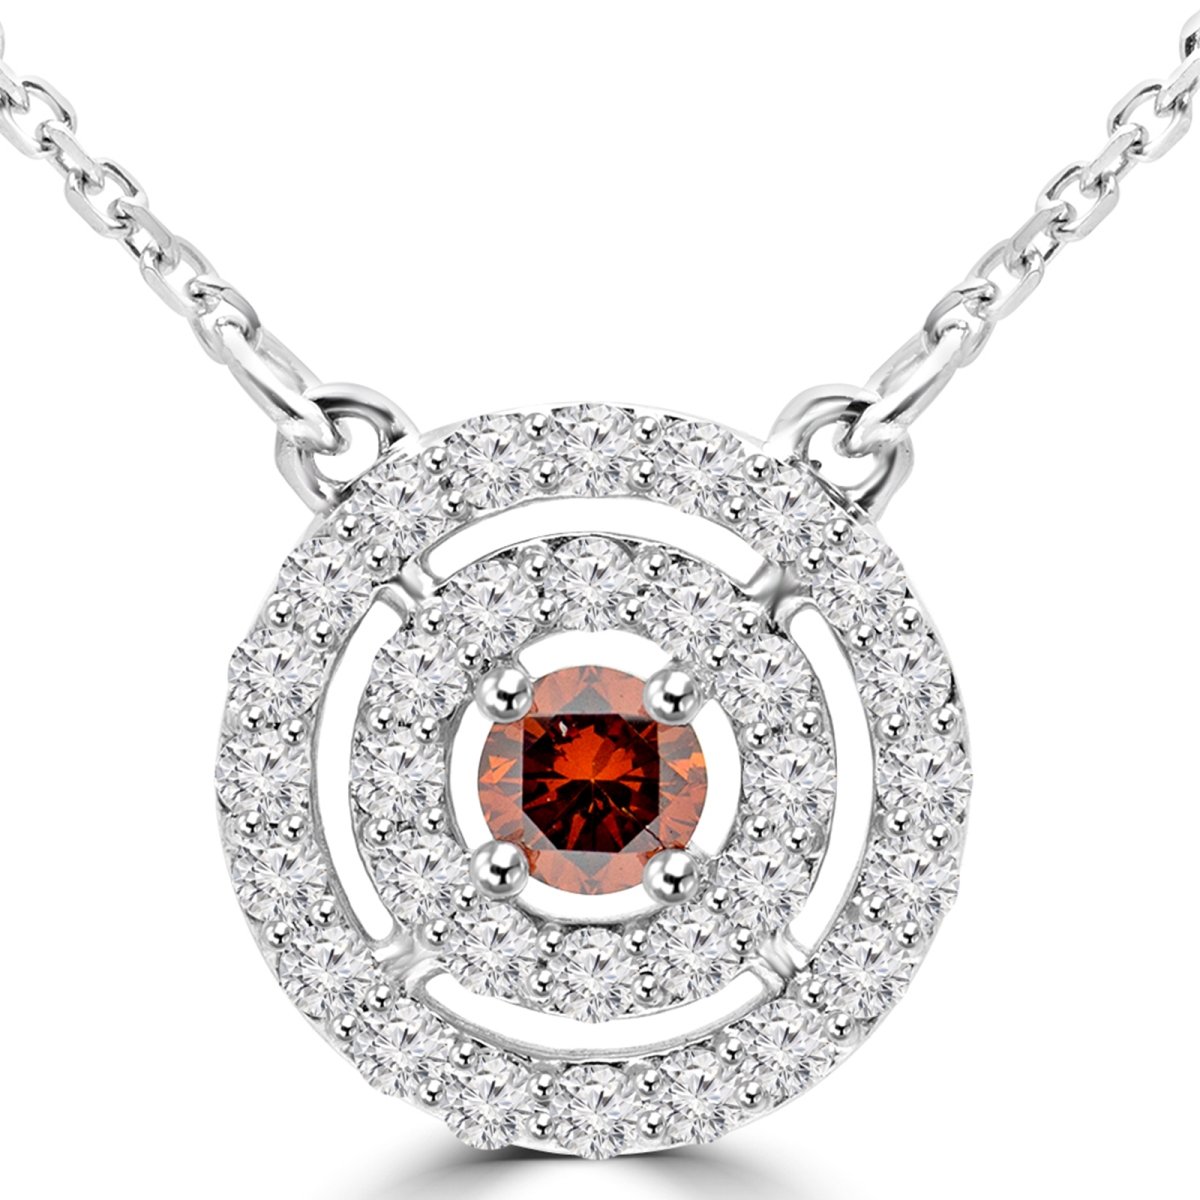 Majesty Diamonds MD160088 0.6 CTW Red and White Diamond Double Halo Pendant Necklace in 14K